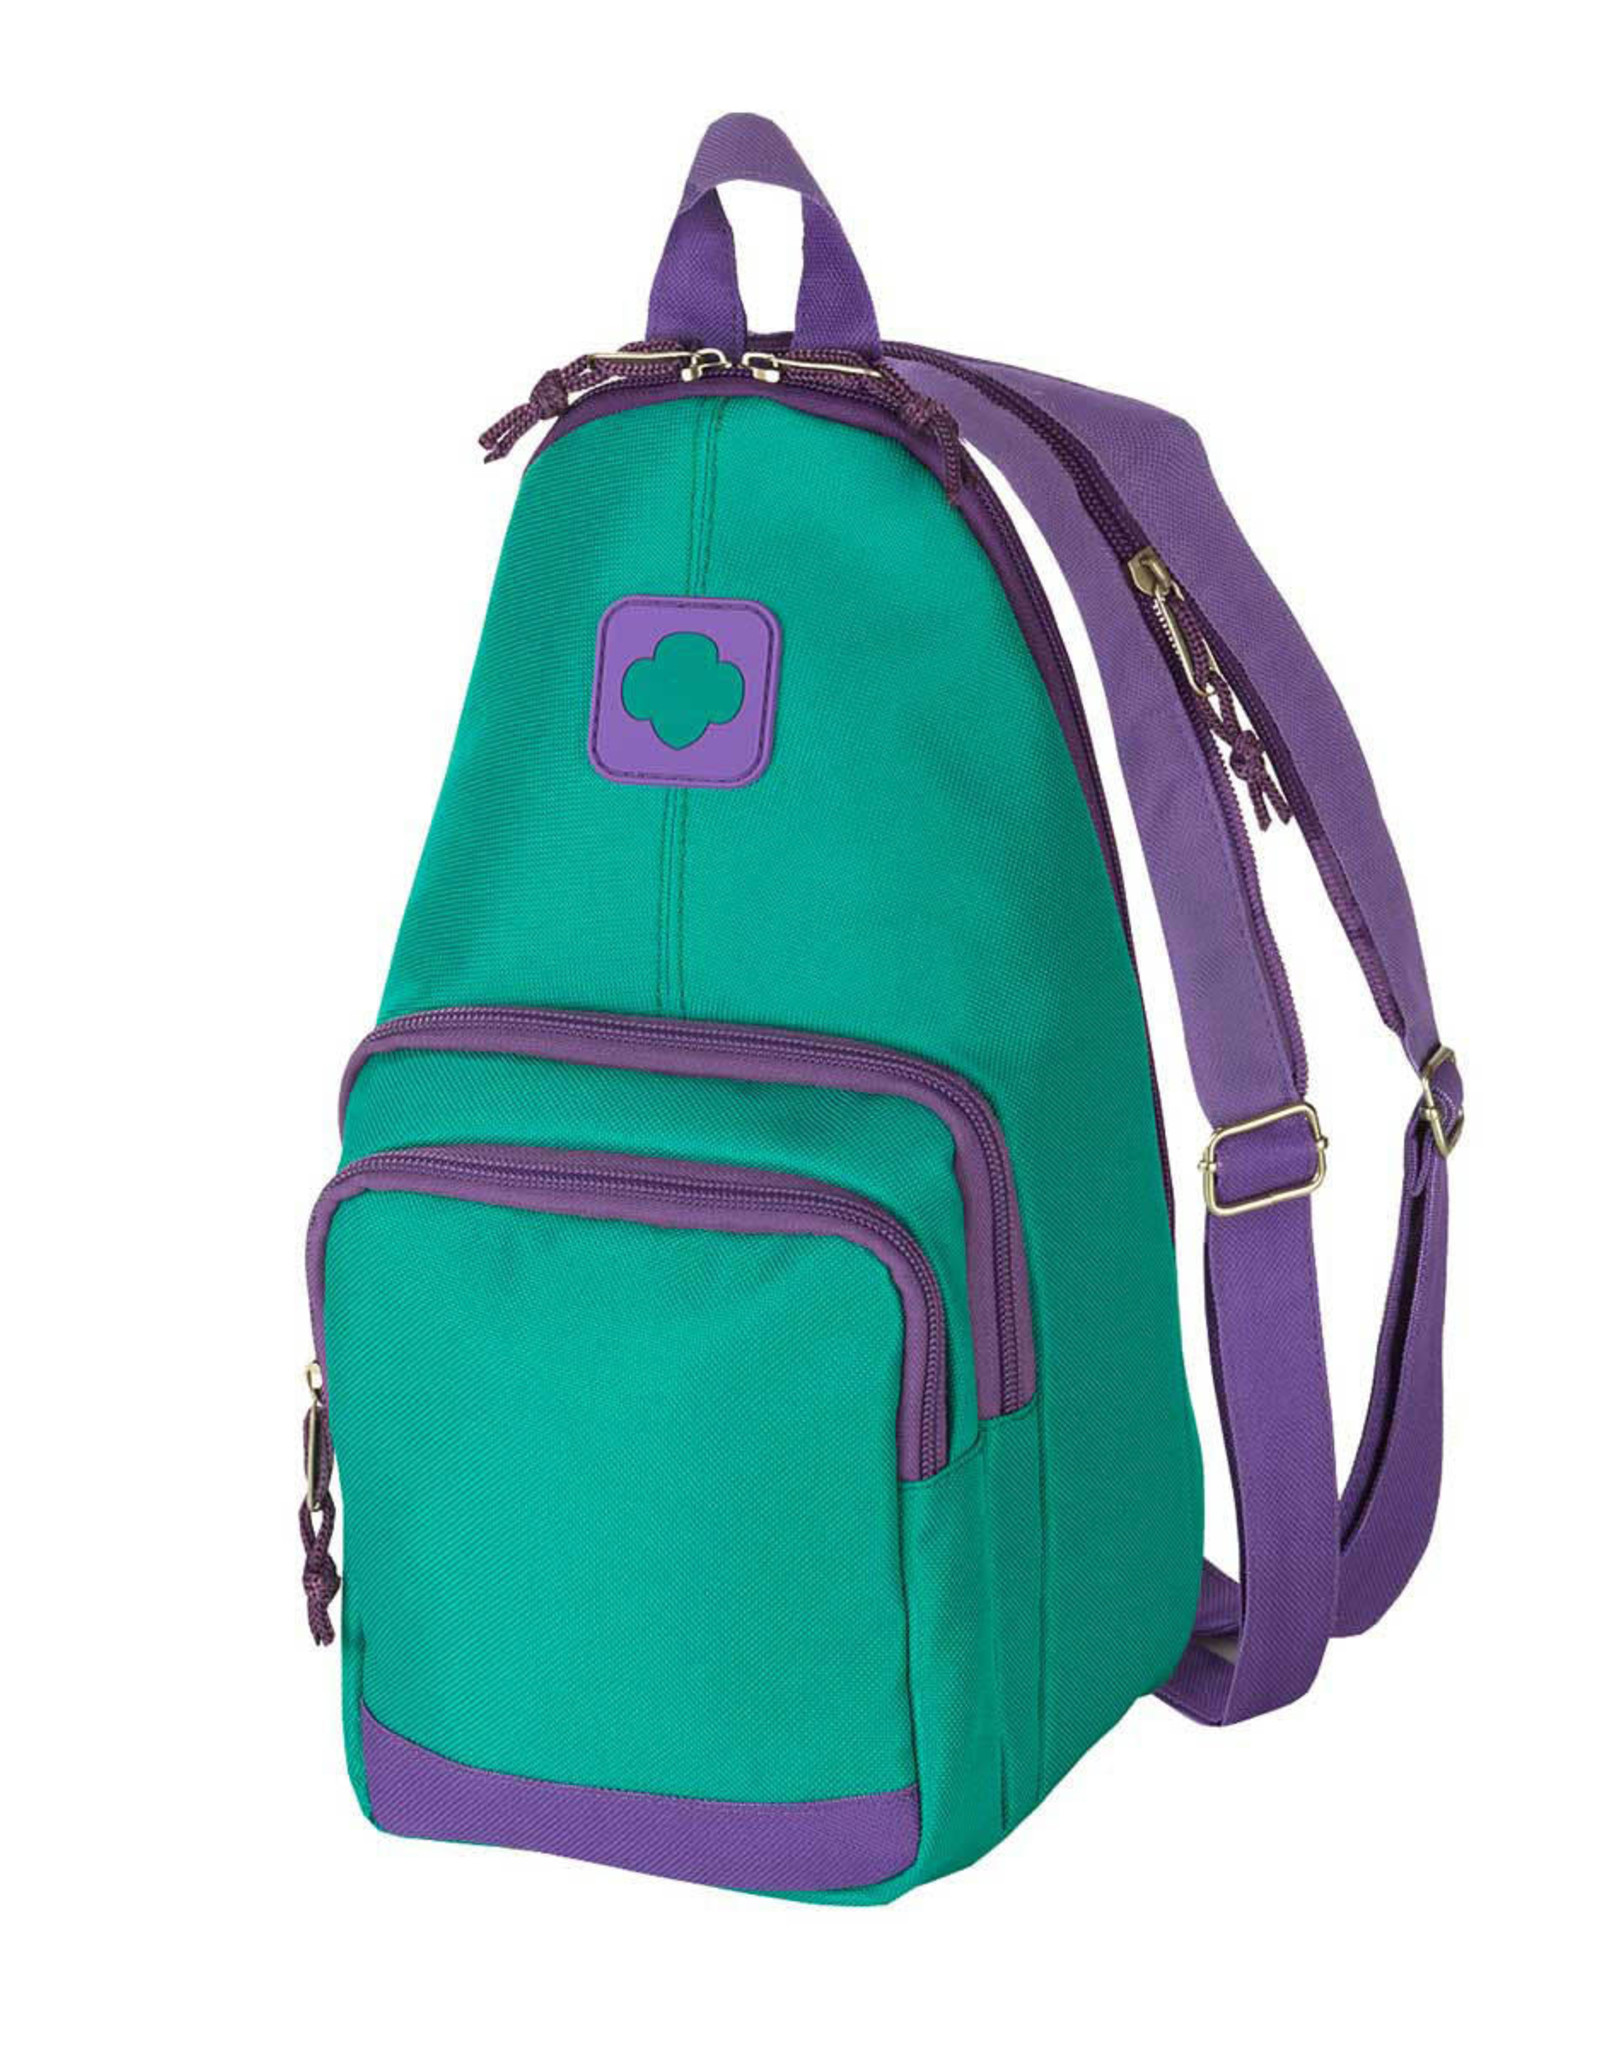 GIRL SCOUTS OF THE USA Junior Sling Backpack